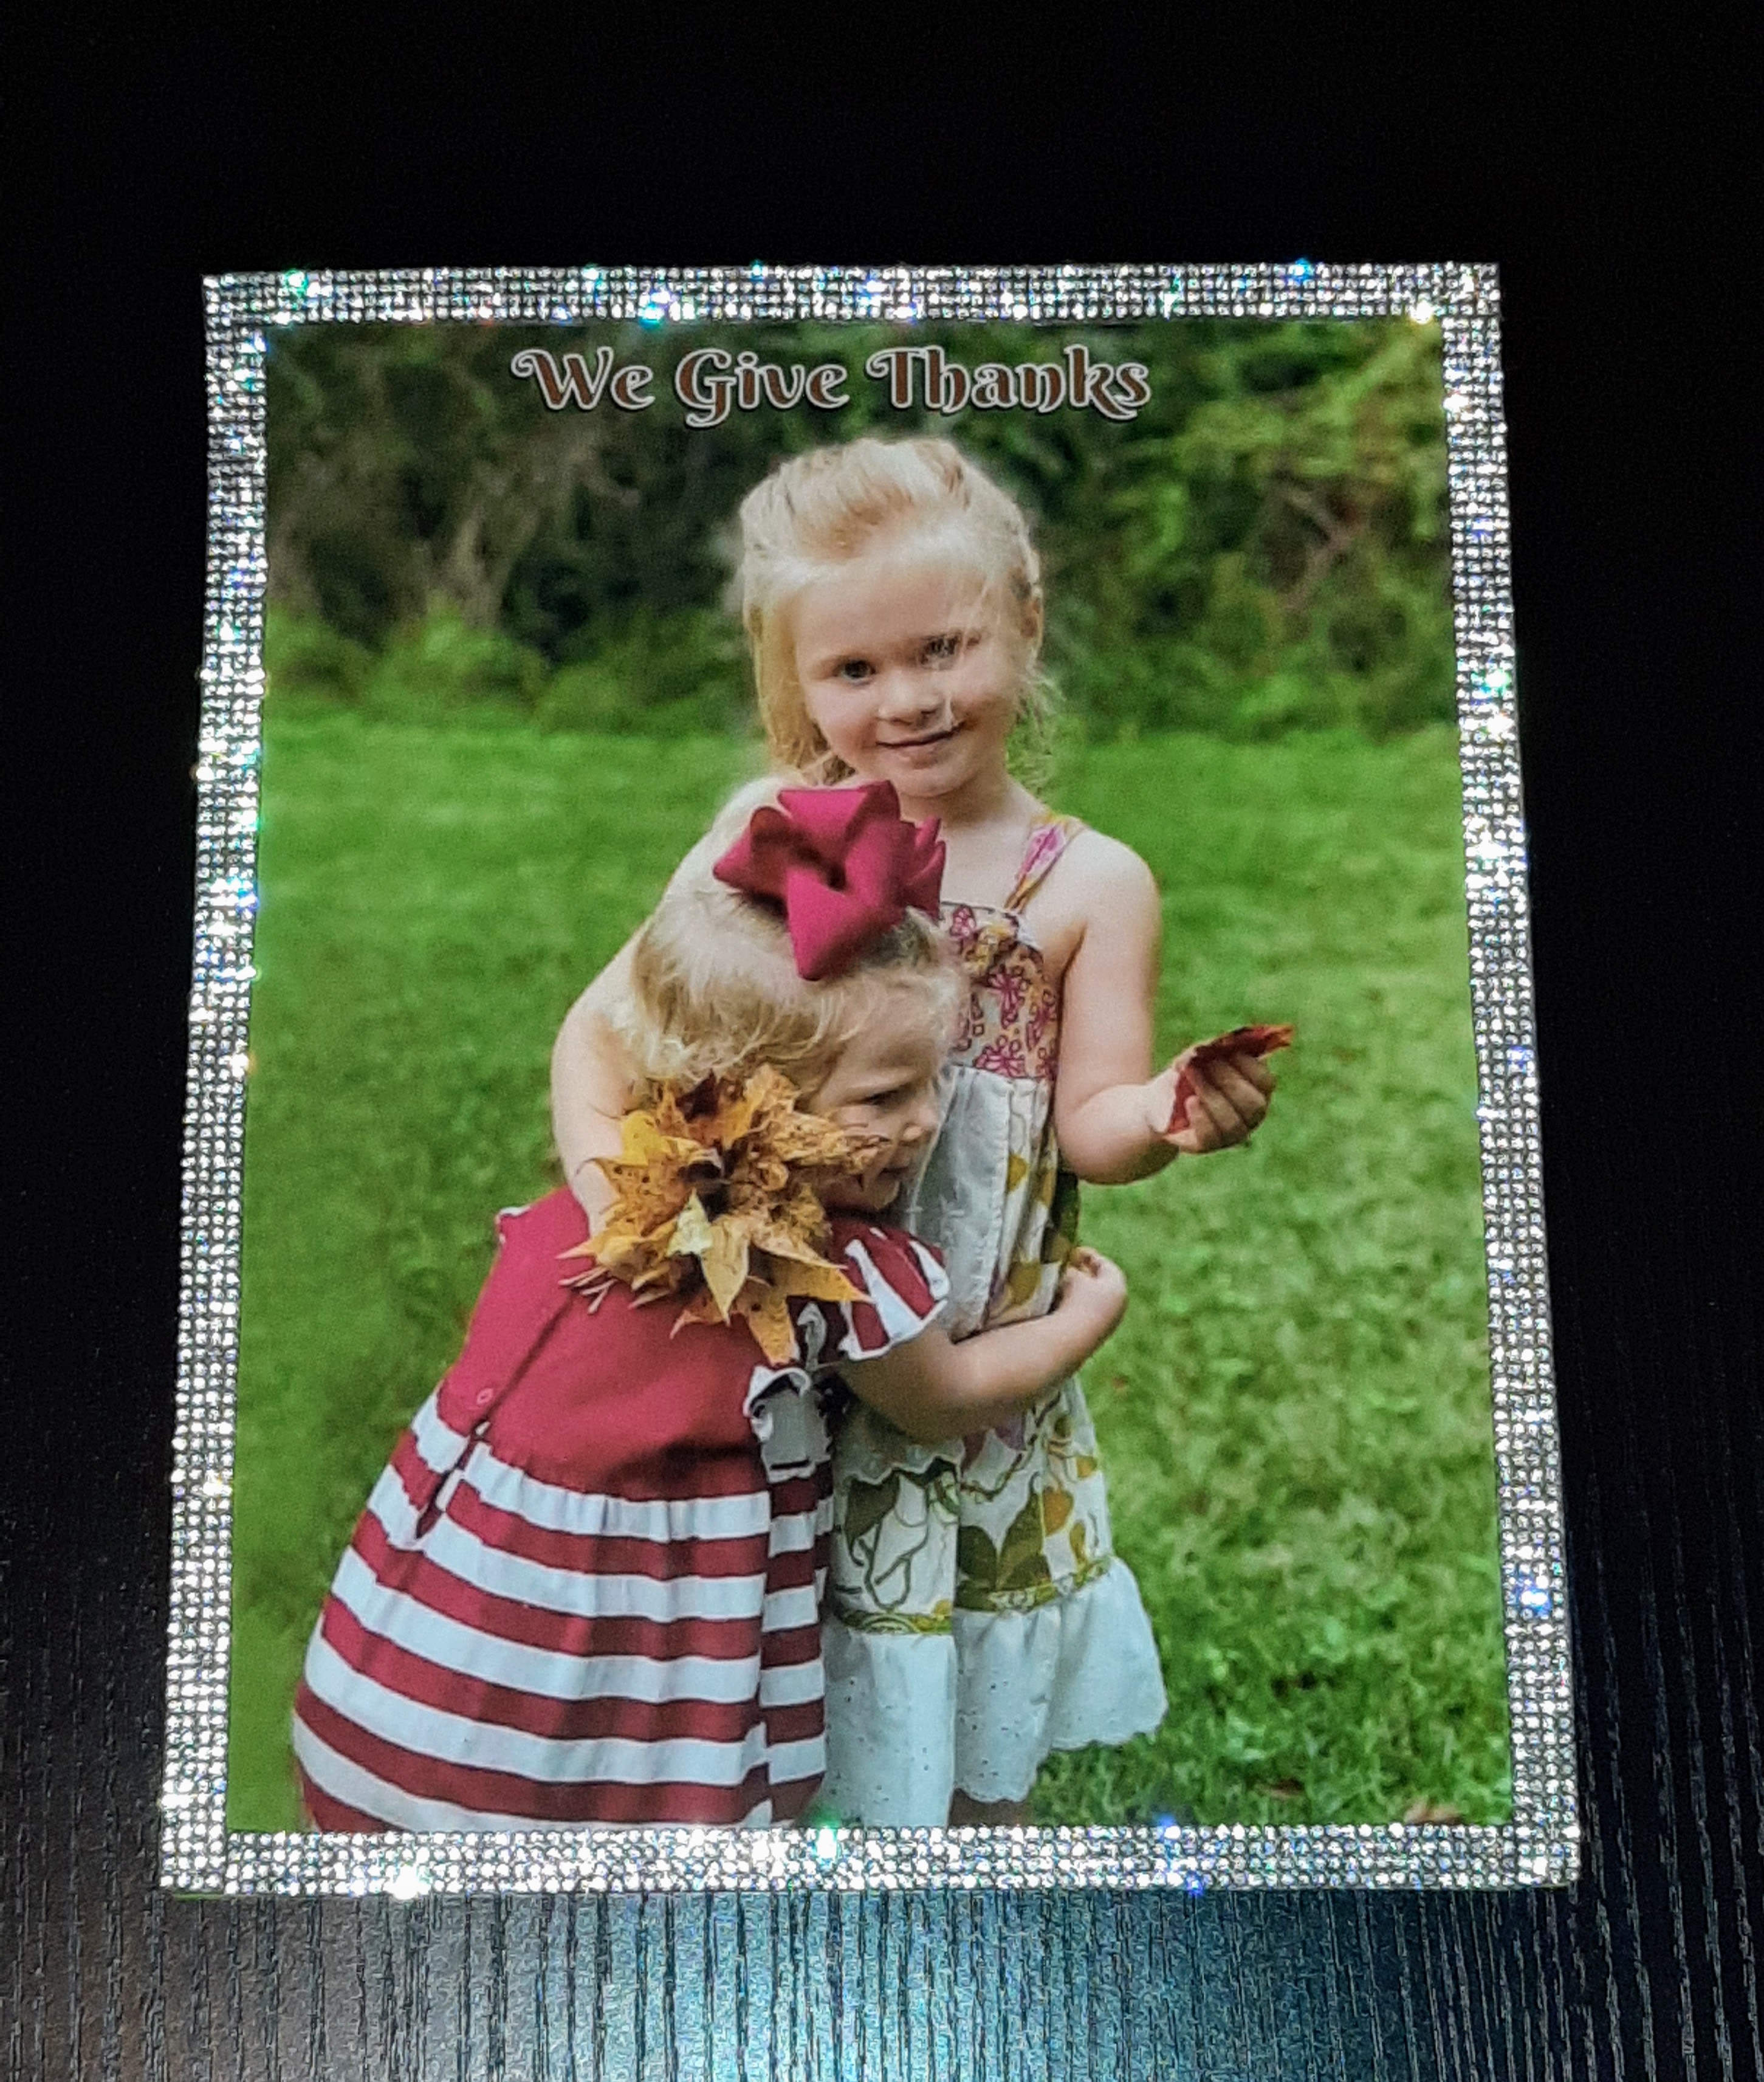 Photo Sublimated on panel and blinged out with crystal rhinestones. Lots of sparkle for sure!